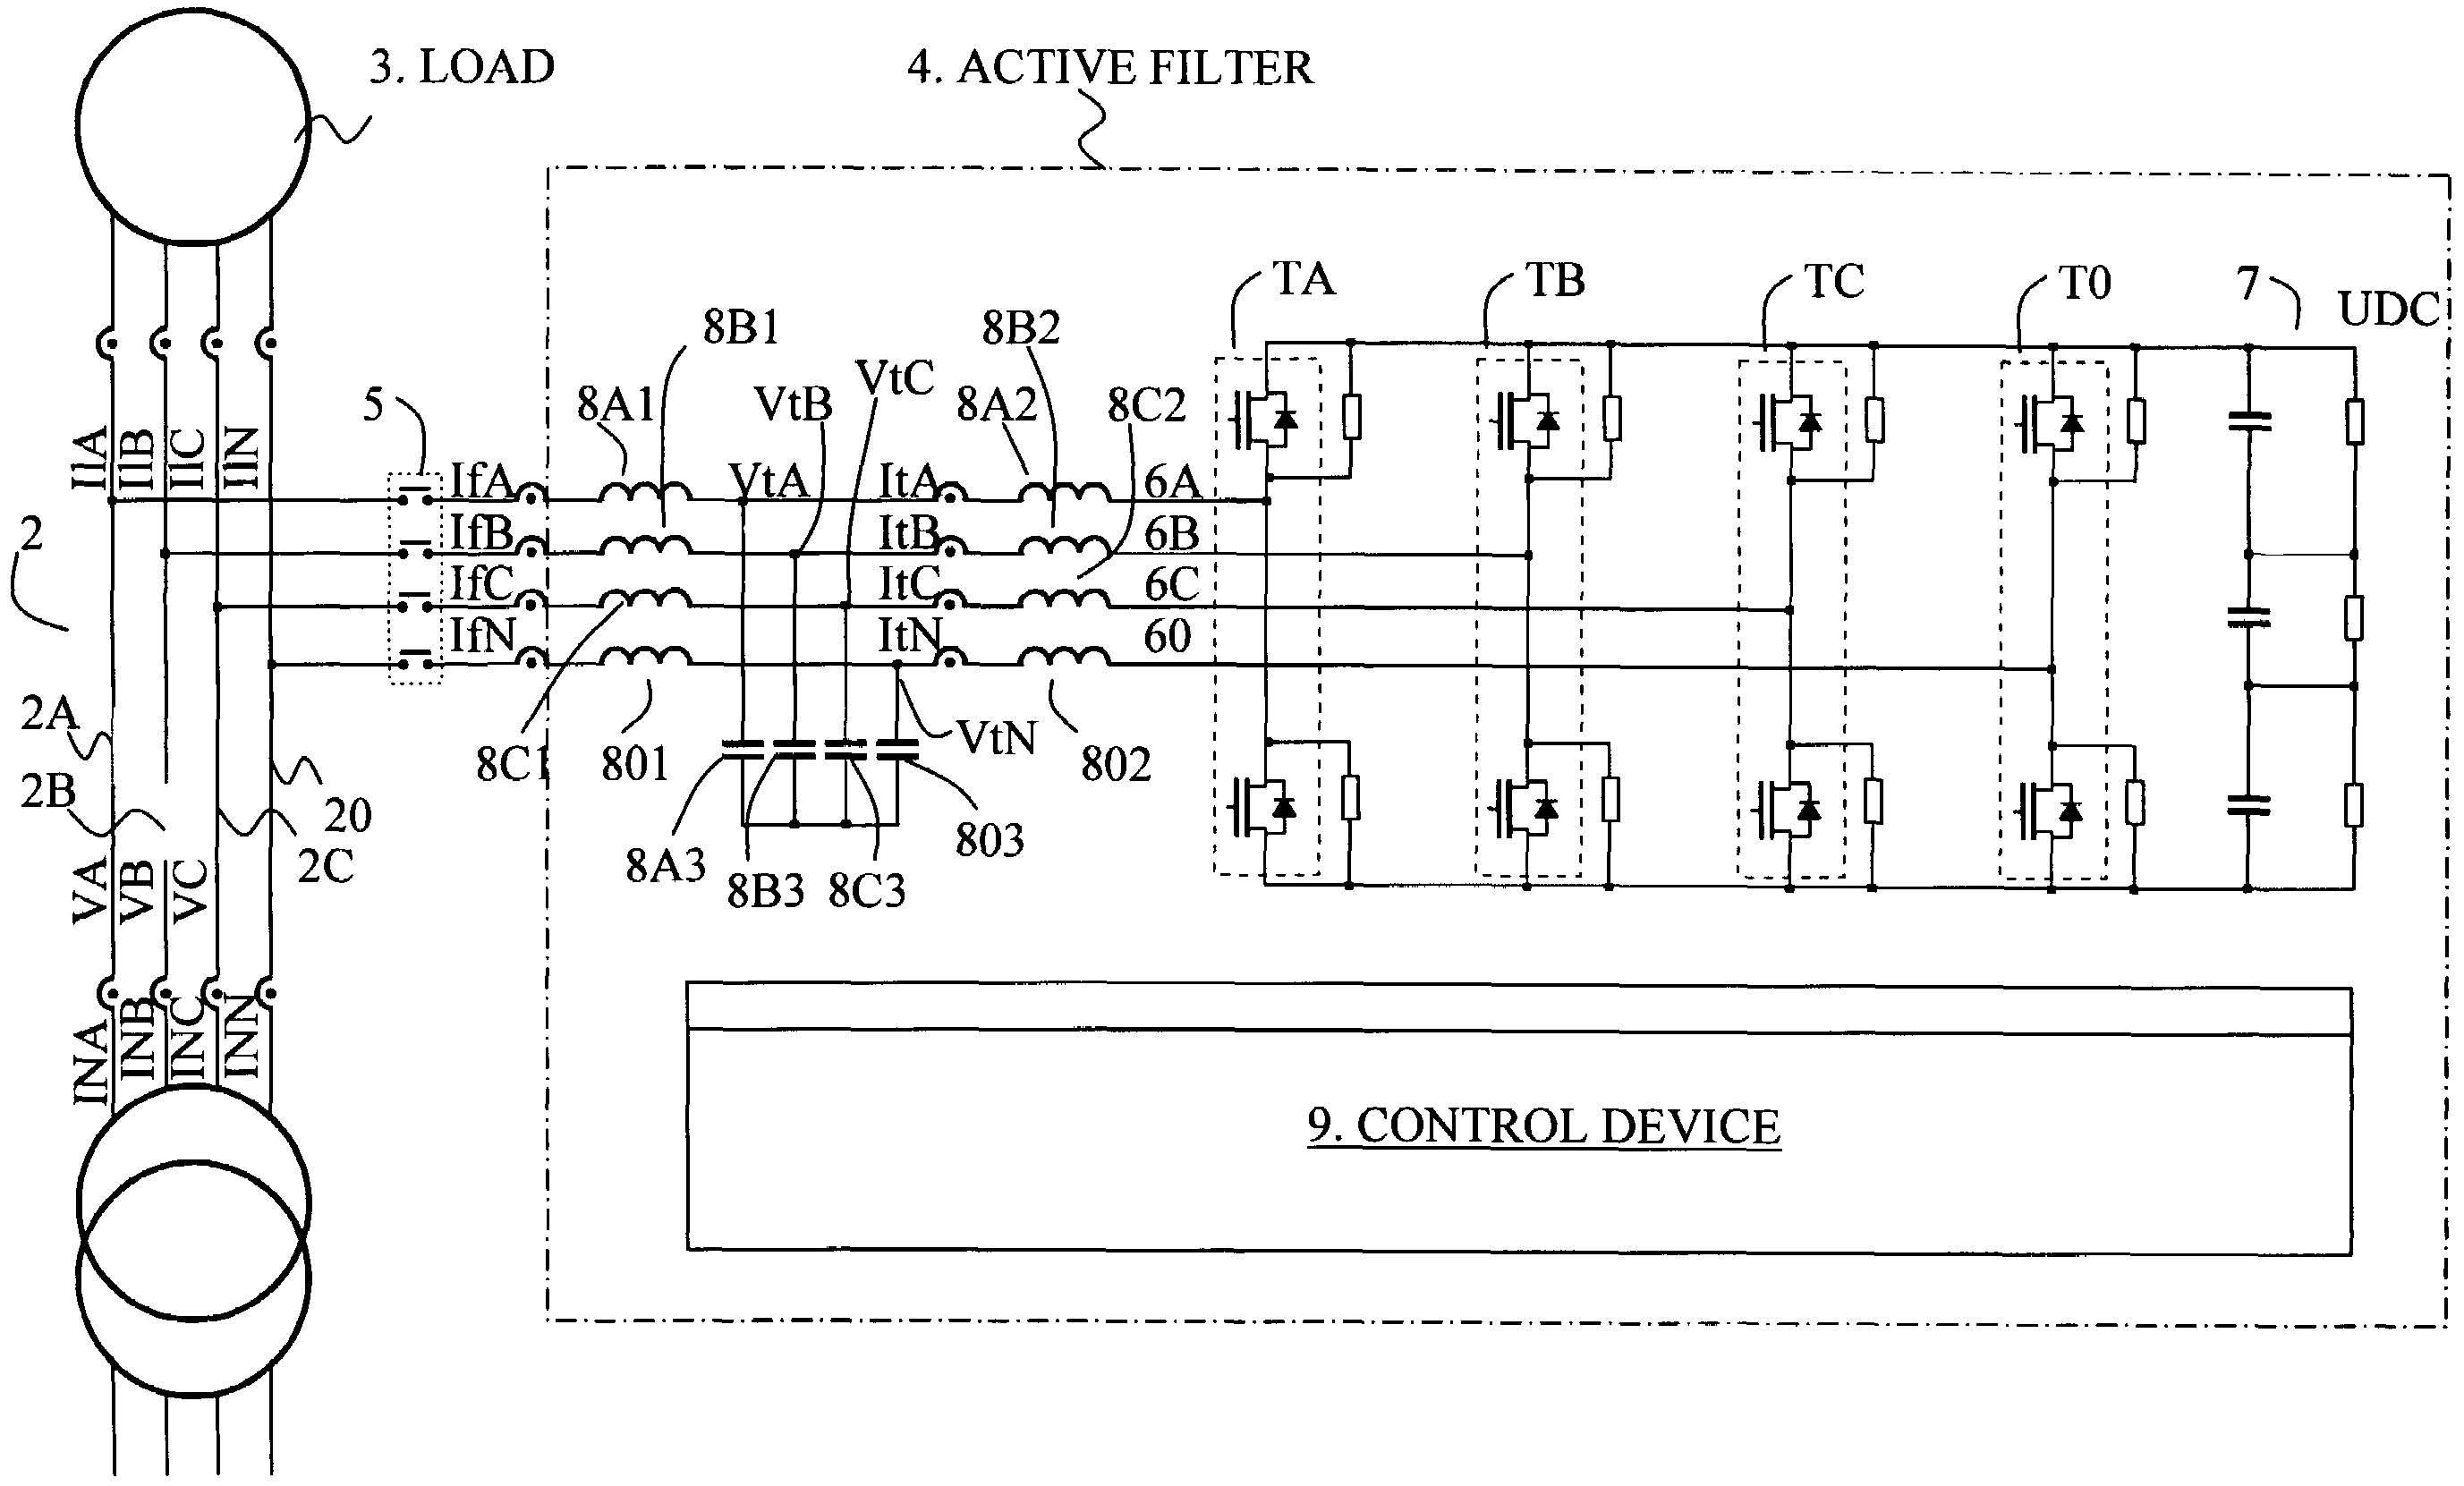 T-filter for reducing disturbances generated on a power grid by an active filter